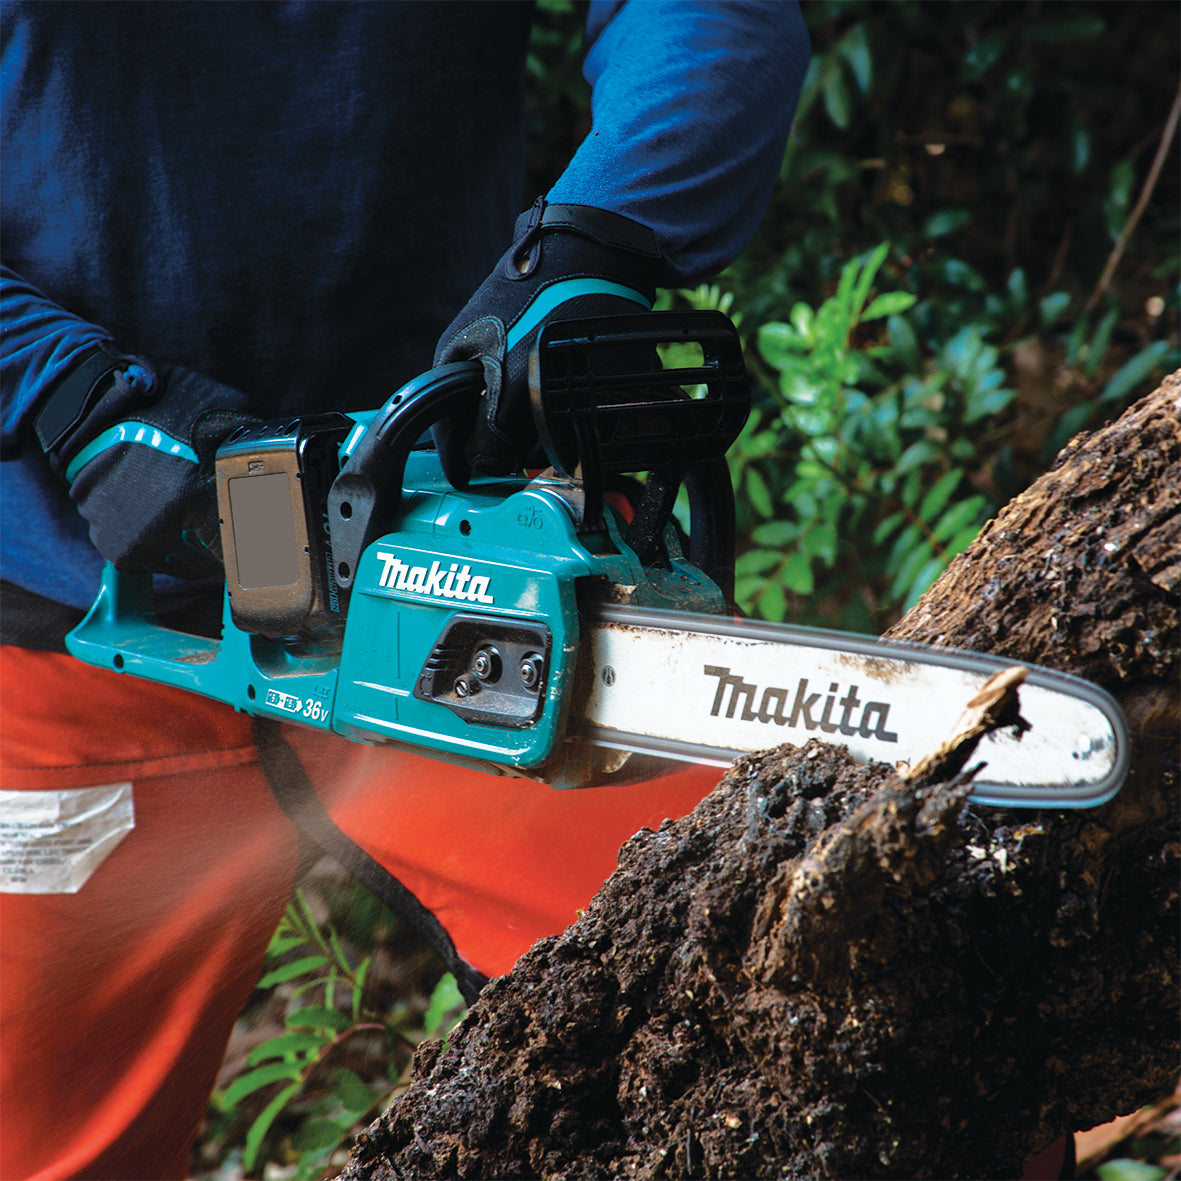 18Vx2 400mm 16" Brushless Chainsaw Bare (Tool Only) DUC405Z by Makita